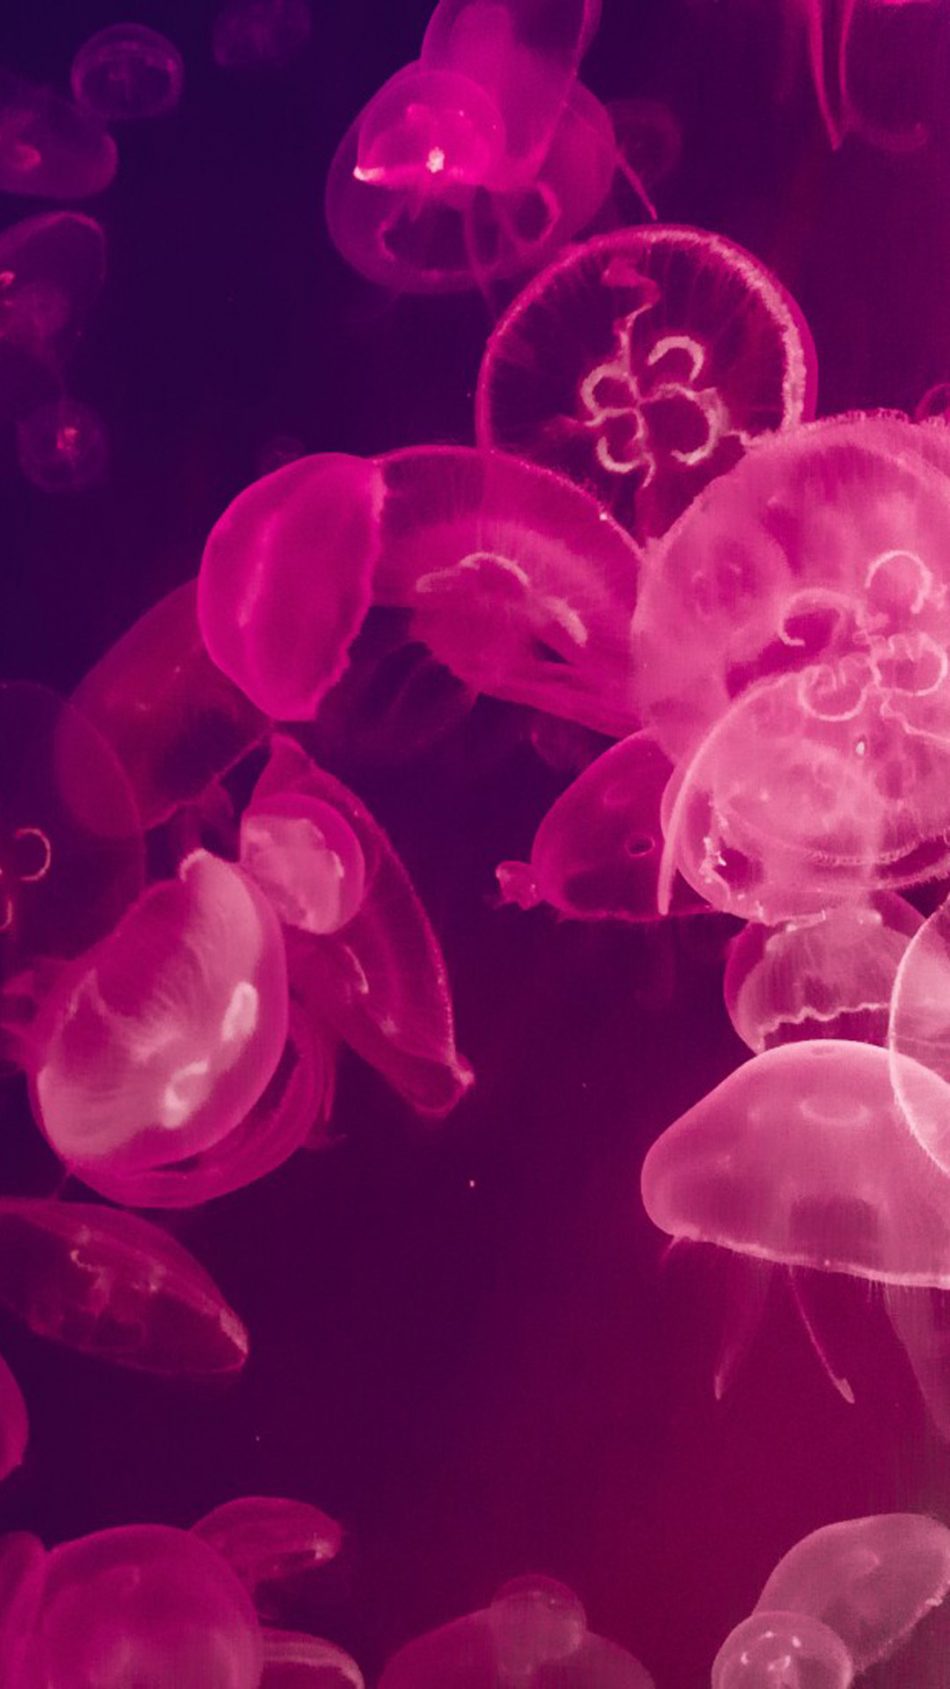 Pink Jellyfishes Underwater Hd Mobile Wallpaper - Jellyfish Wallpaper 4k For Phone - HD Wallpaper 